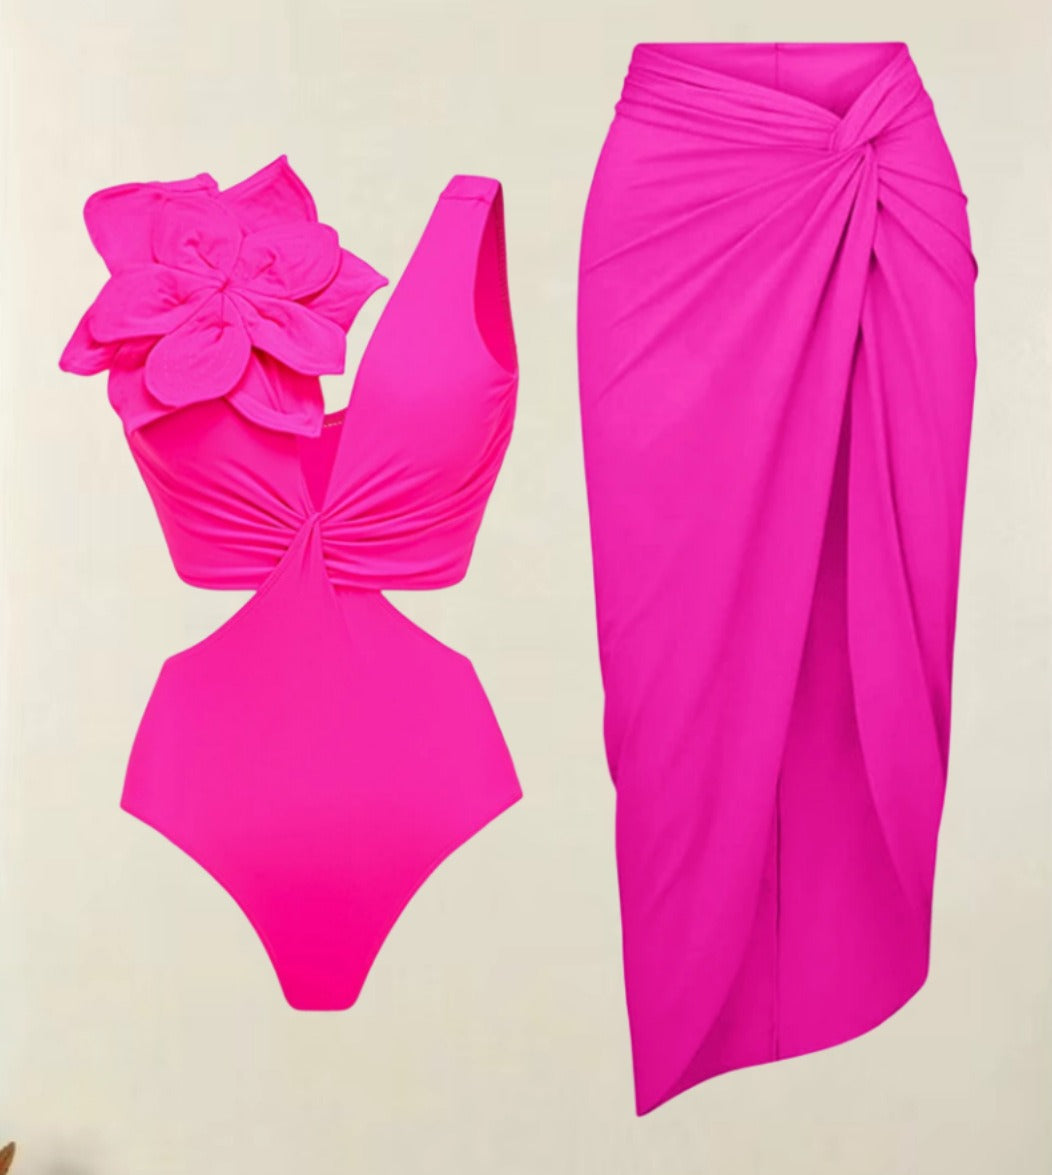 3D Flower Ruffle One-Piece Swimsuit + Cover Up Sets